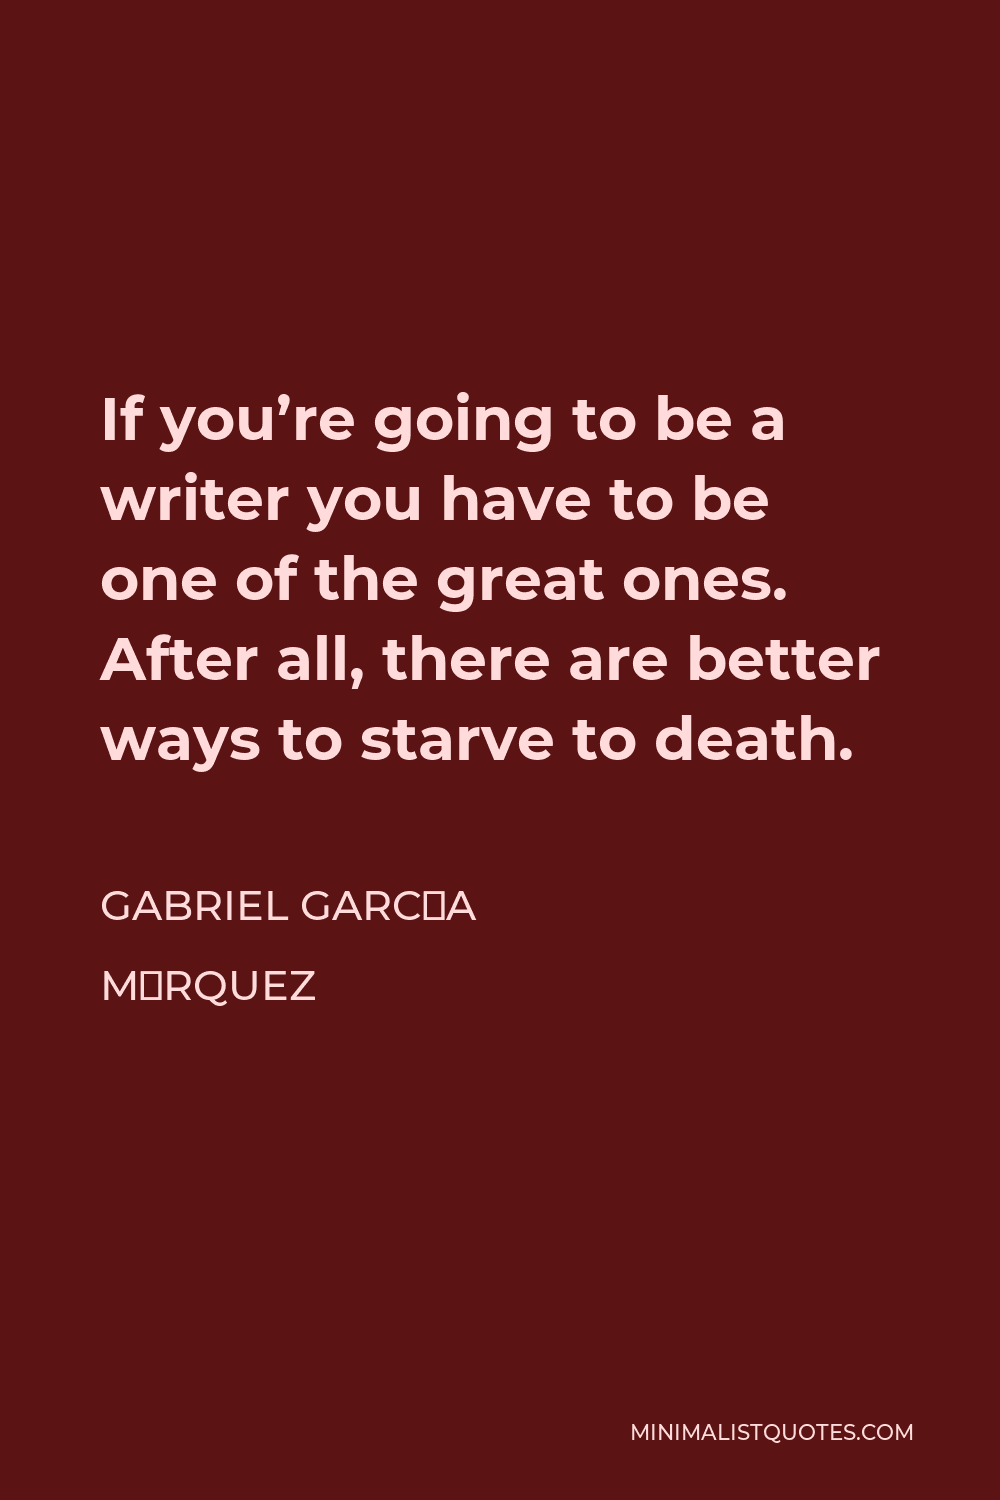 Gabriel García Márquez Quote - If you’re going to be a writer you have to be one of the great ones. After all, there are better ways to starve to death.